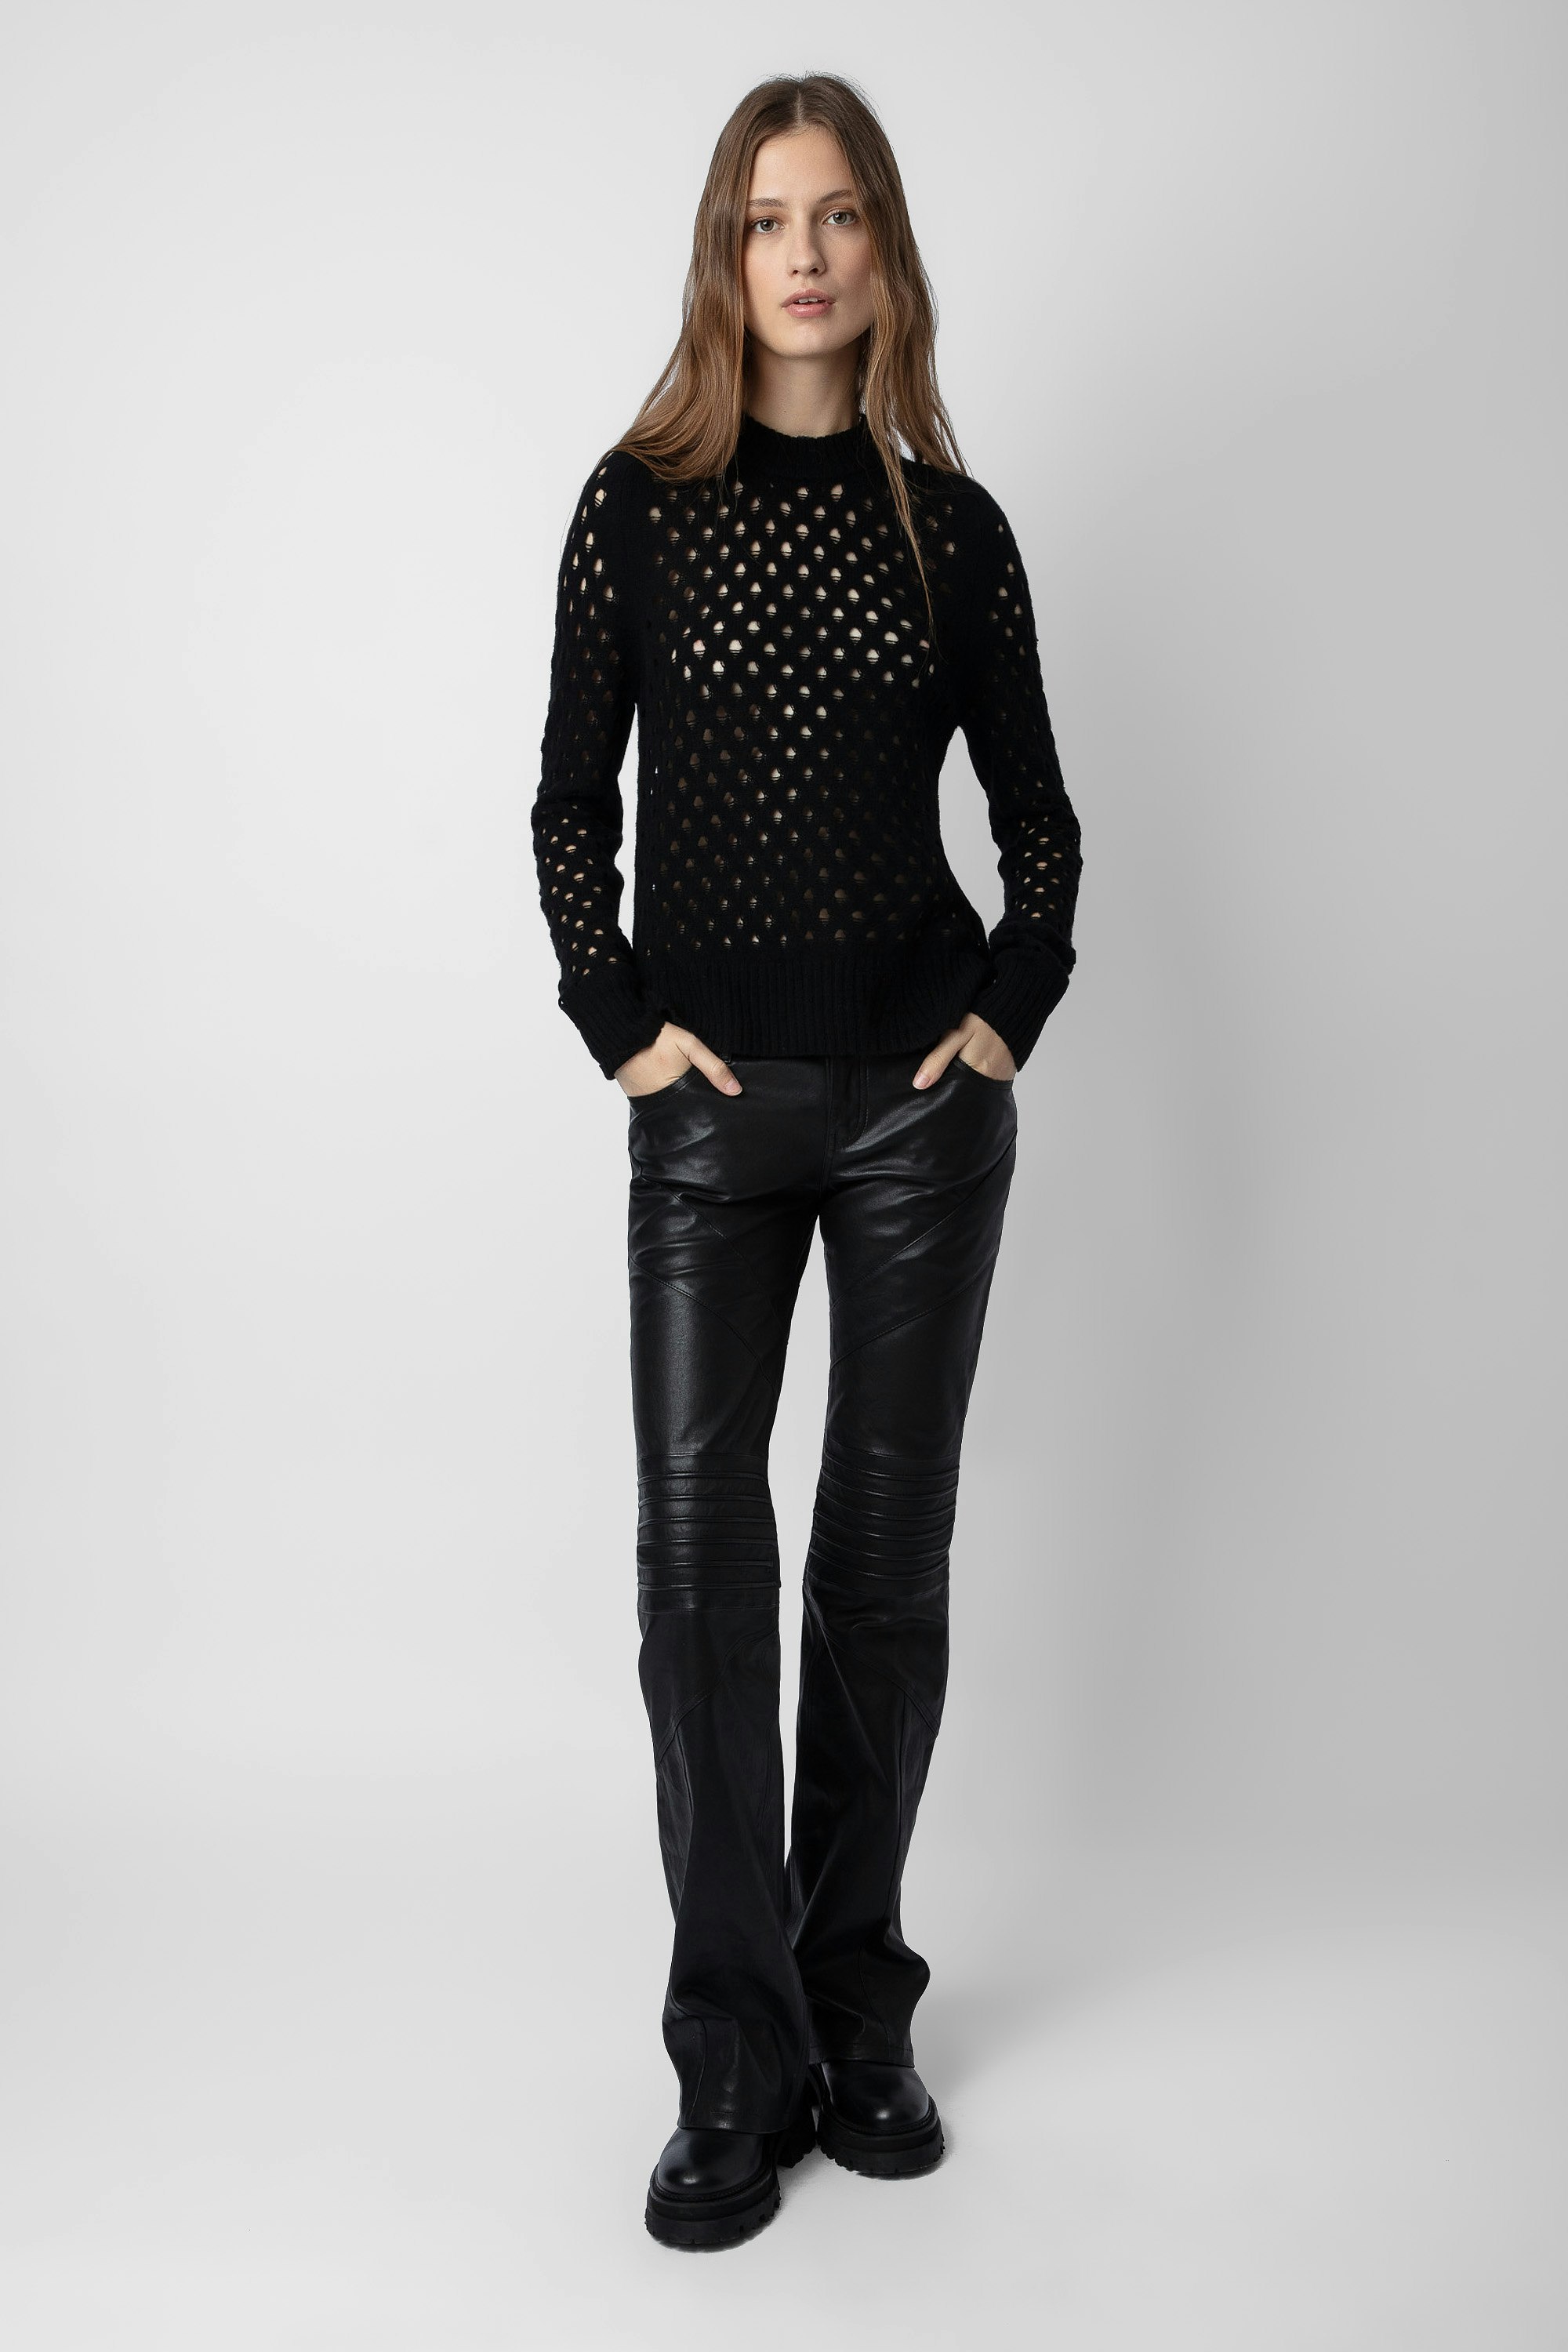 Paulin Leather Trousers - Women’s black leather trousers with overstitched details.